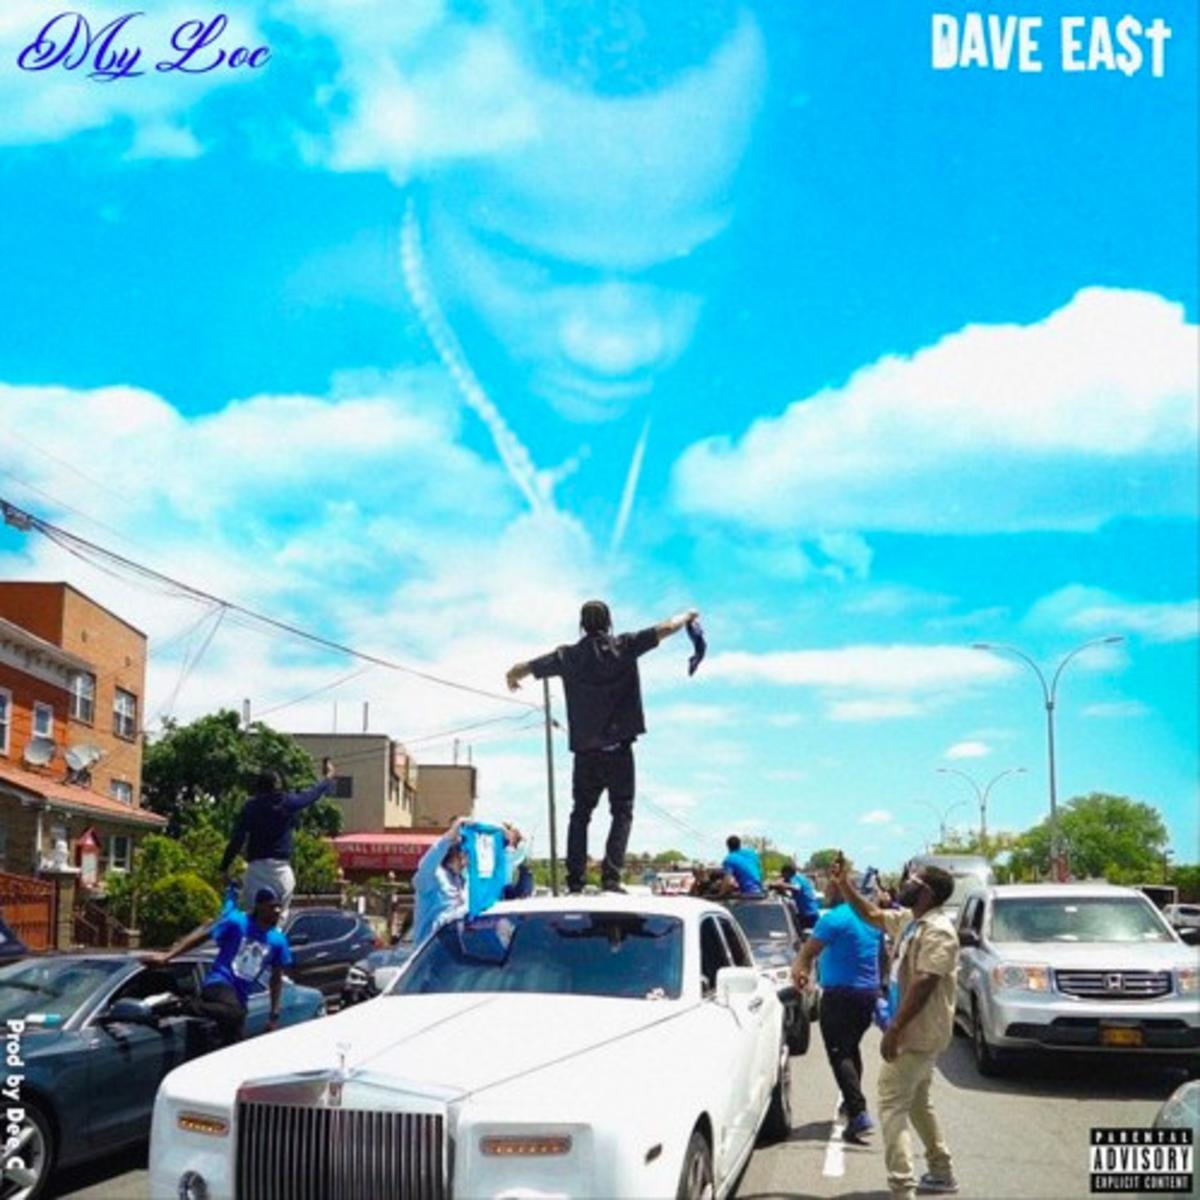 Dave East New Song My Loc